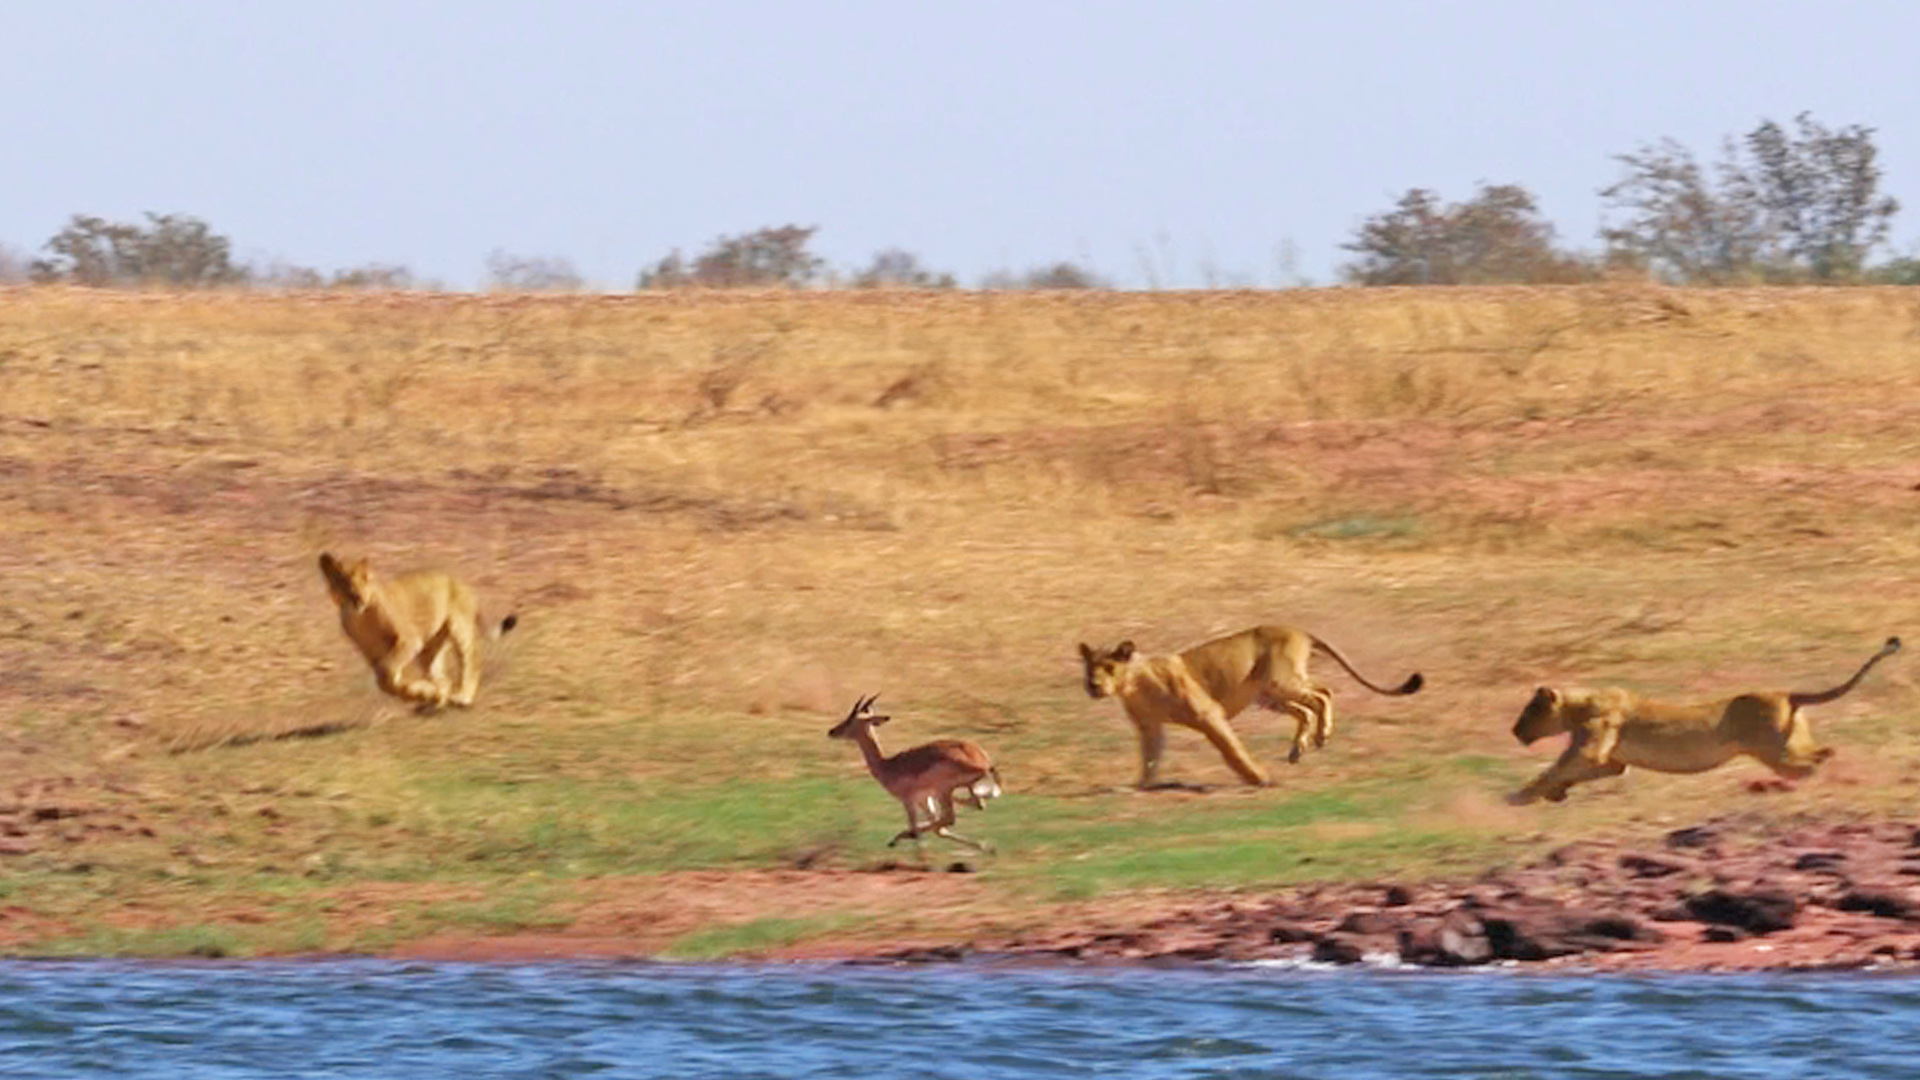 Impalas Try Jumping Over 7 Lions